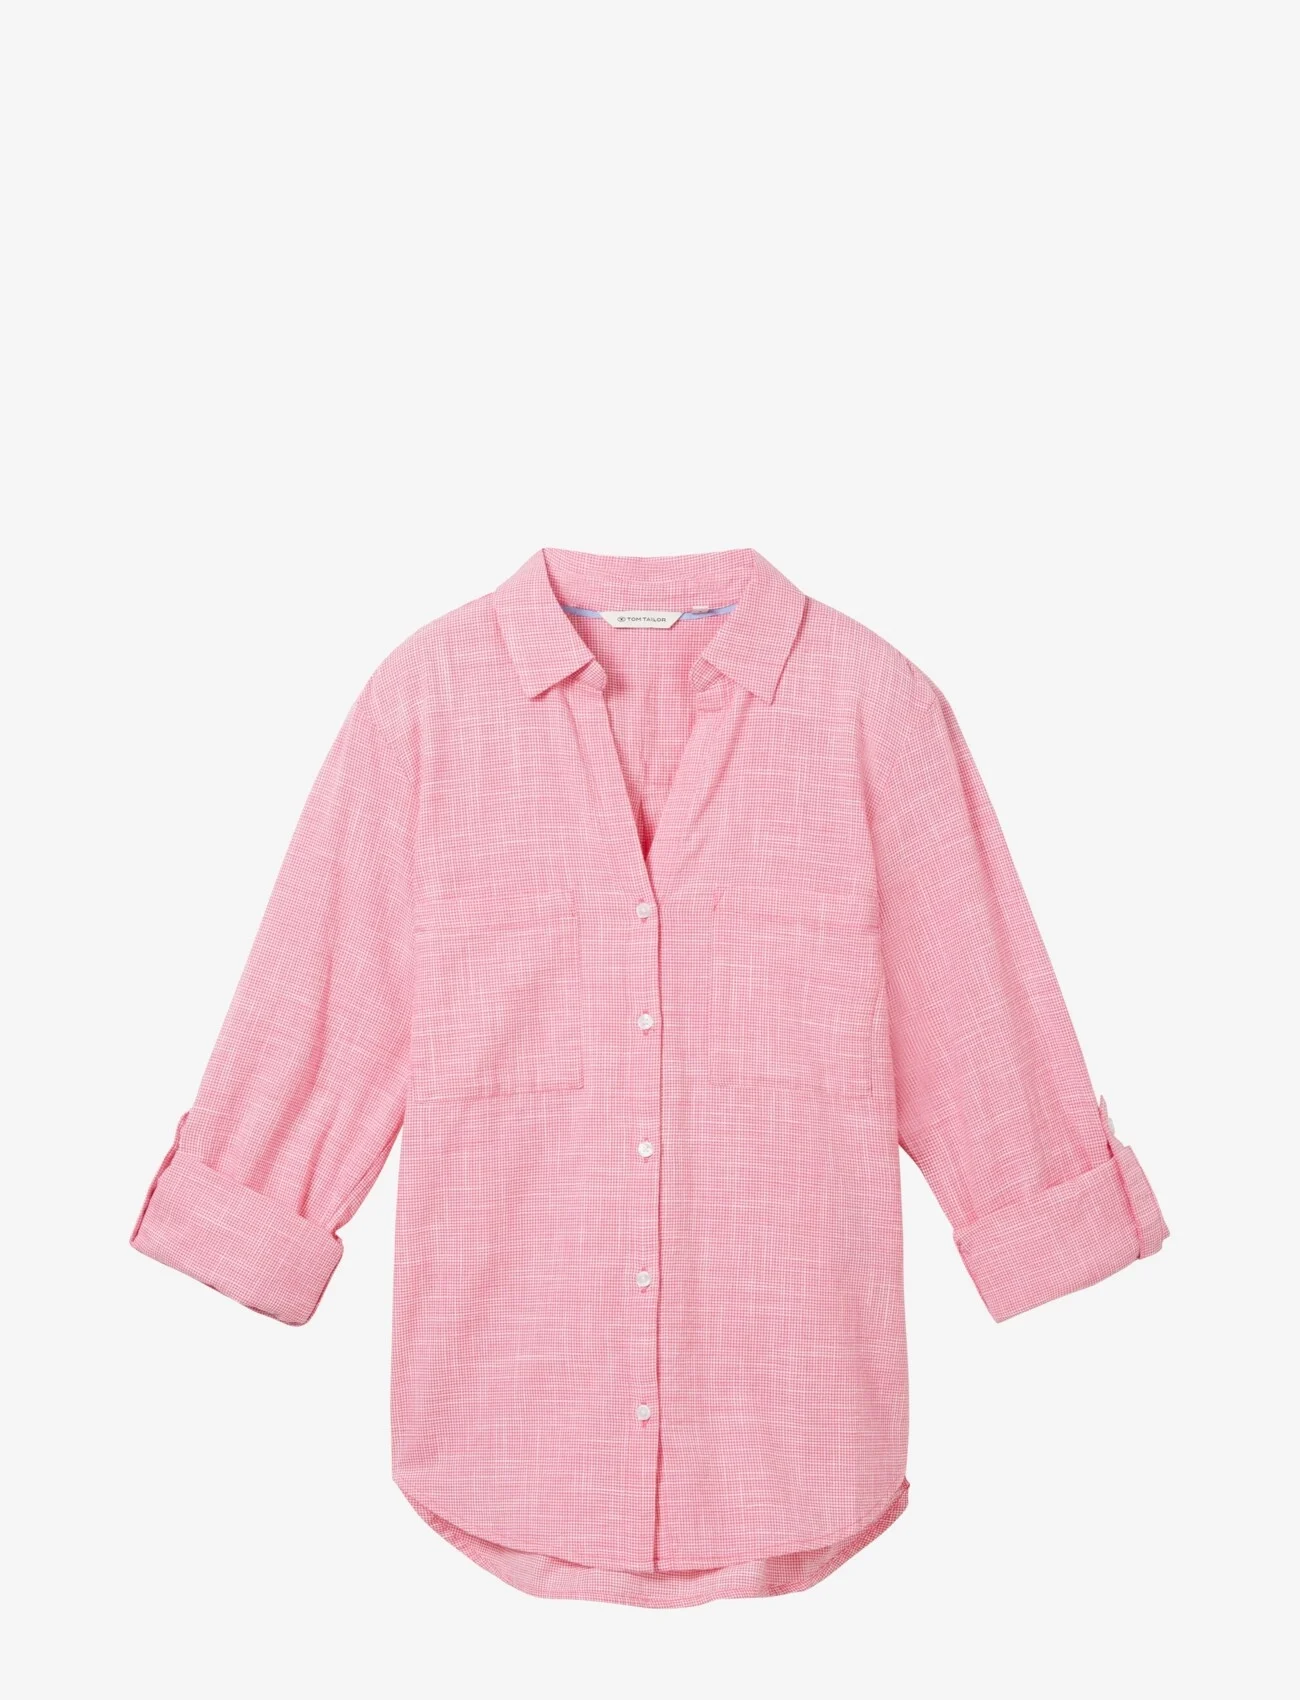 Tom Tailor - blouse with slub structure - long-sleeved shirts - carmine pink - 0